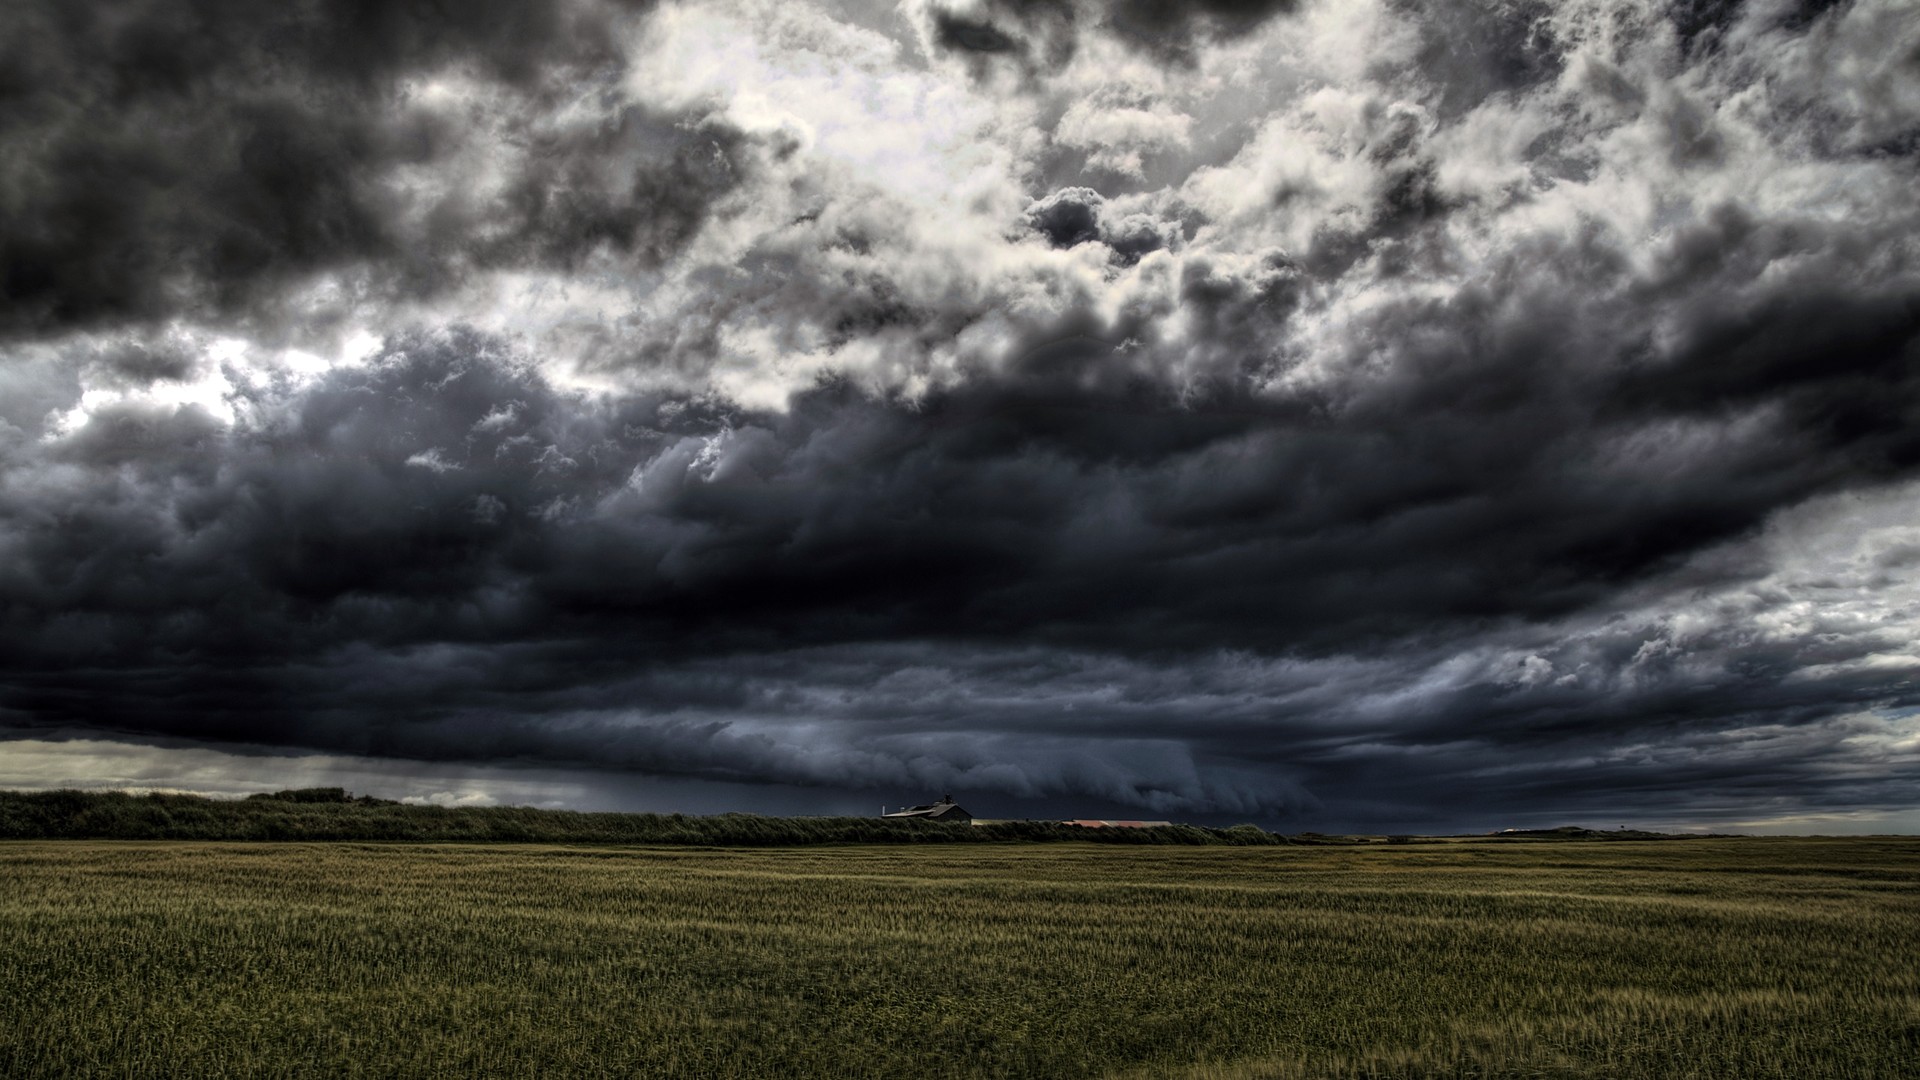 General 1920x1080 nature landscape HDR overcast storm clouds sky photography outdoors